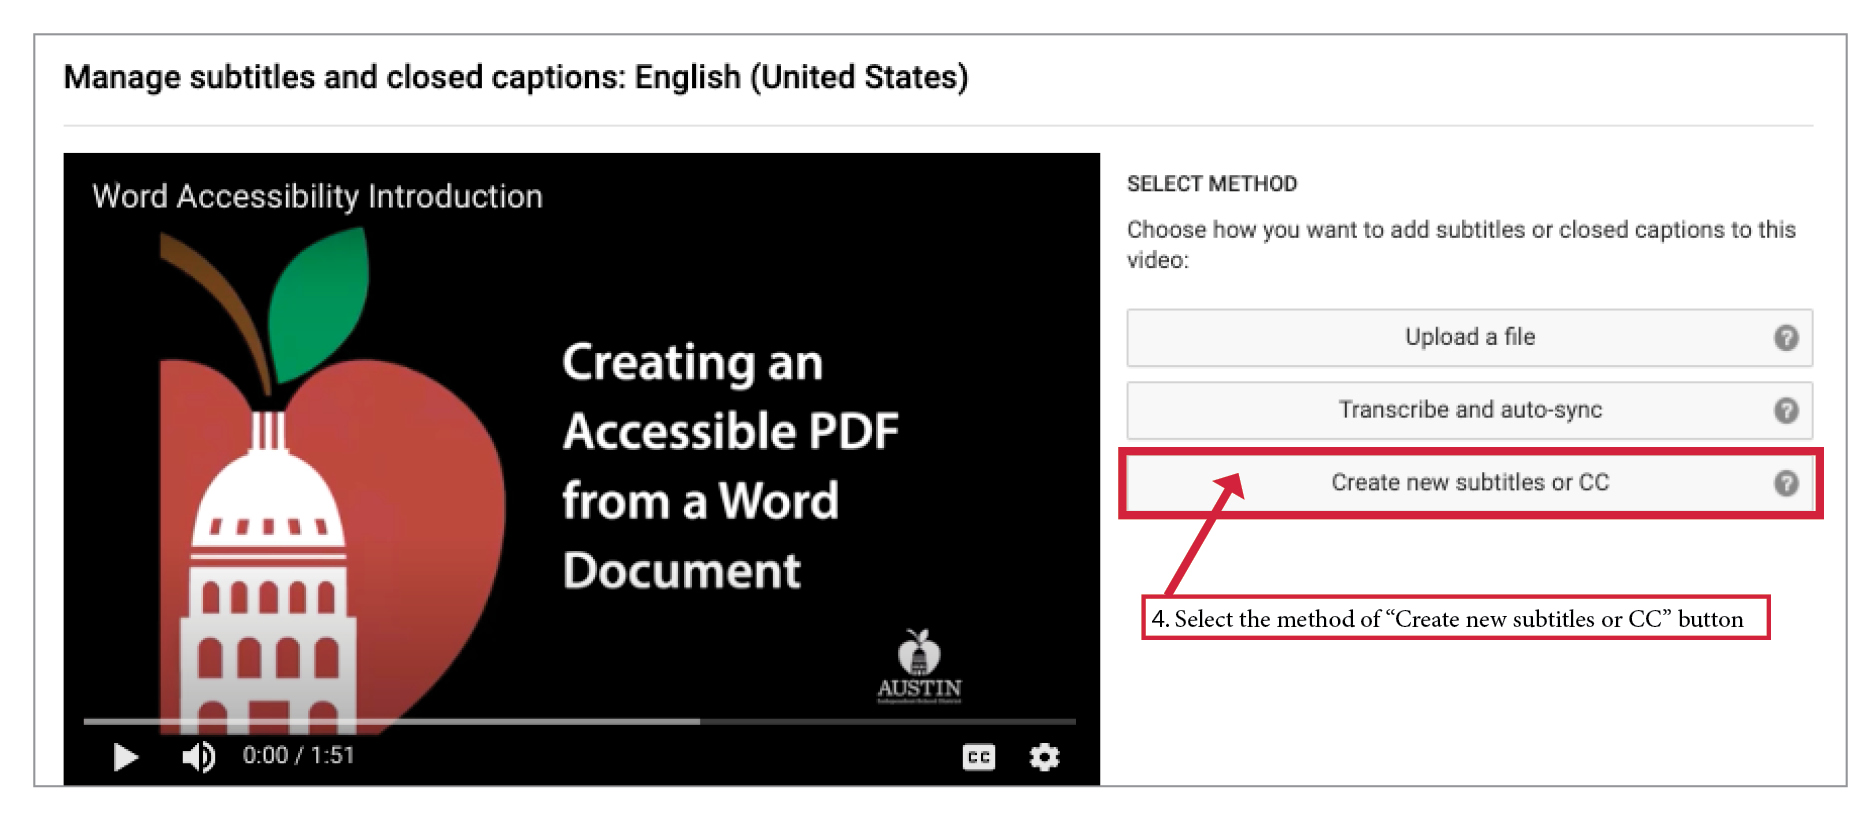 Create new subtitles or cc button highlighted